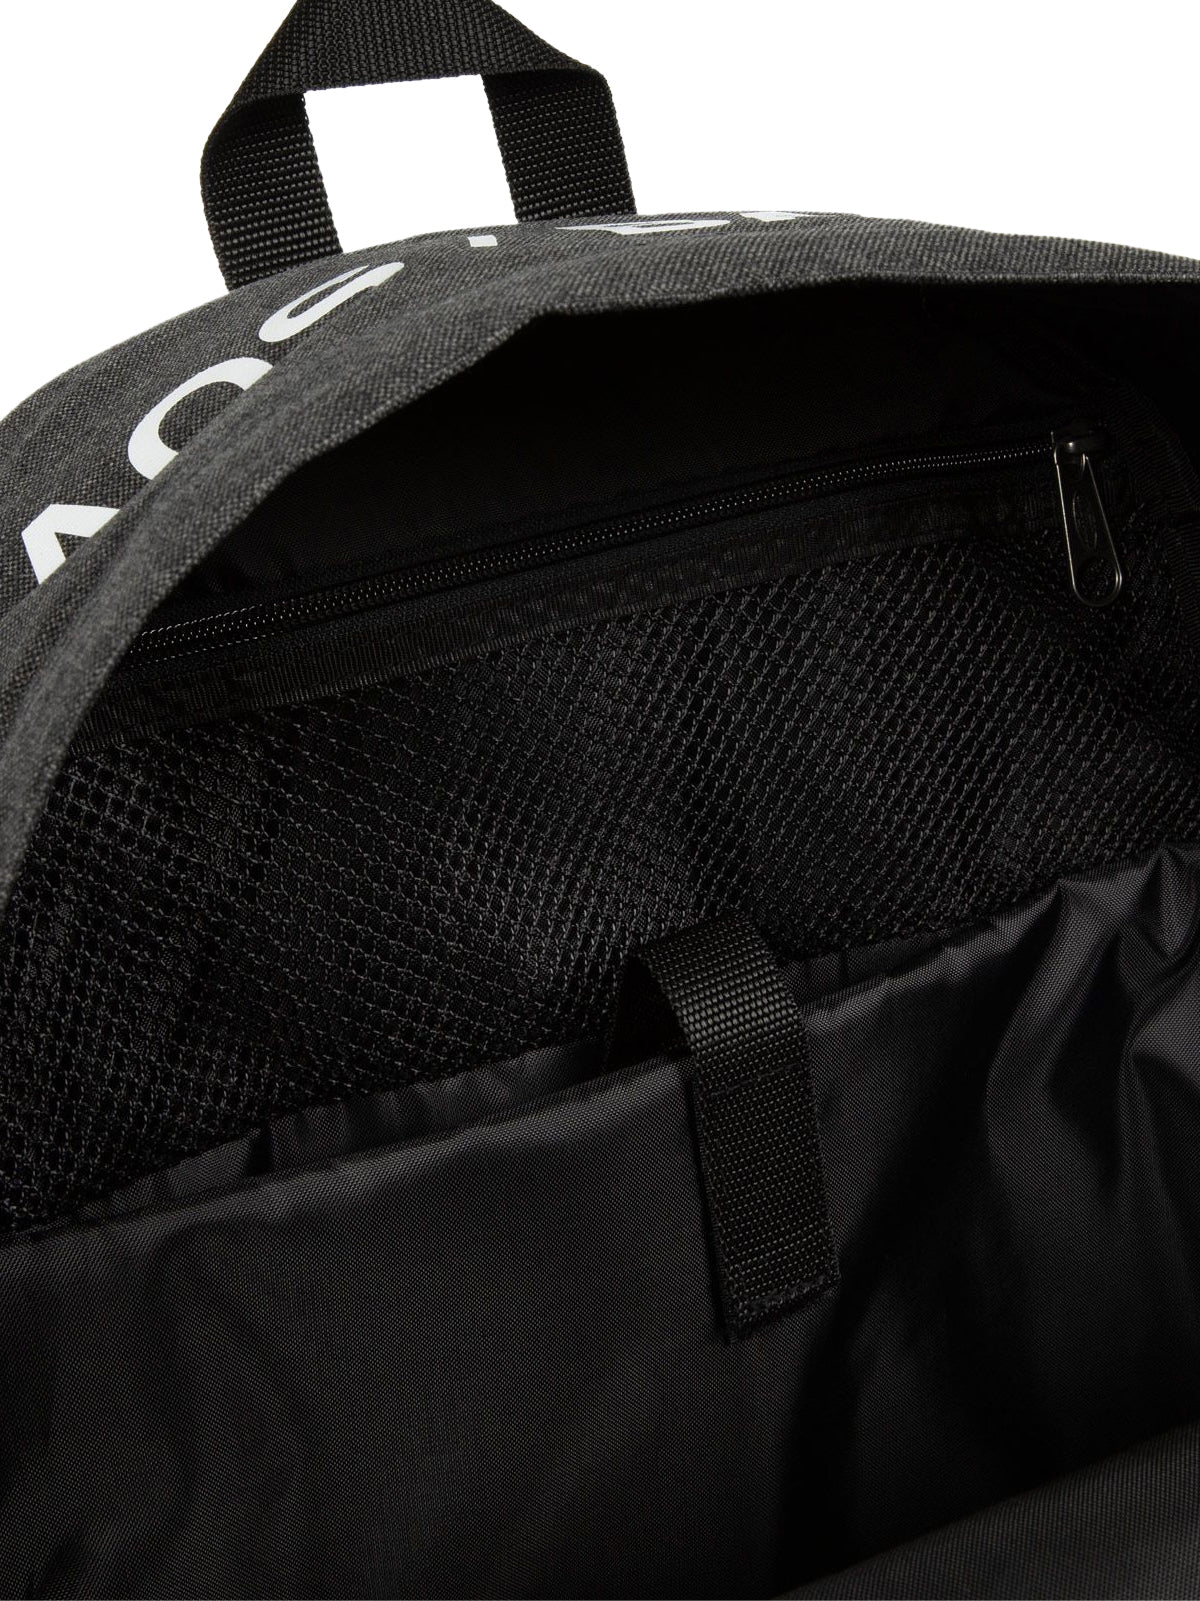 Eastpak x Undercover Padded Doubl'r Backpack